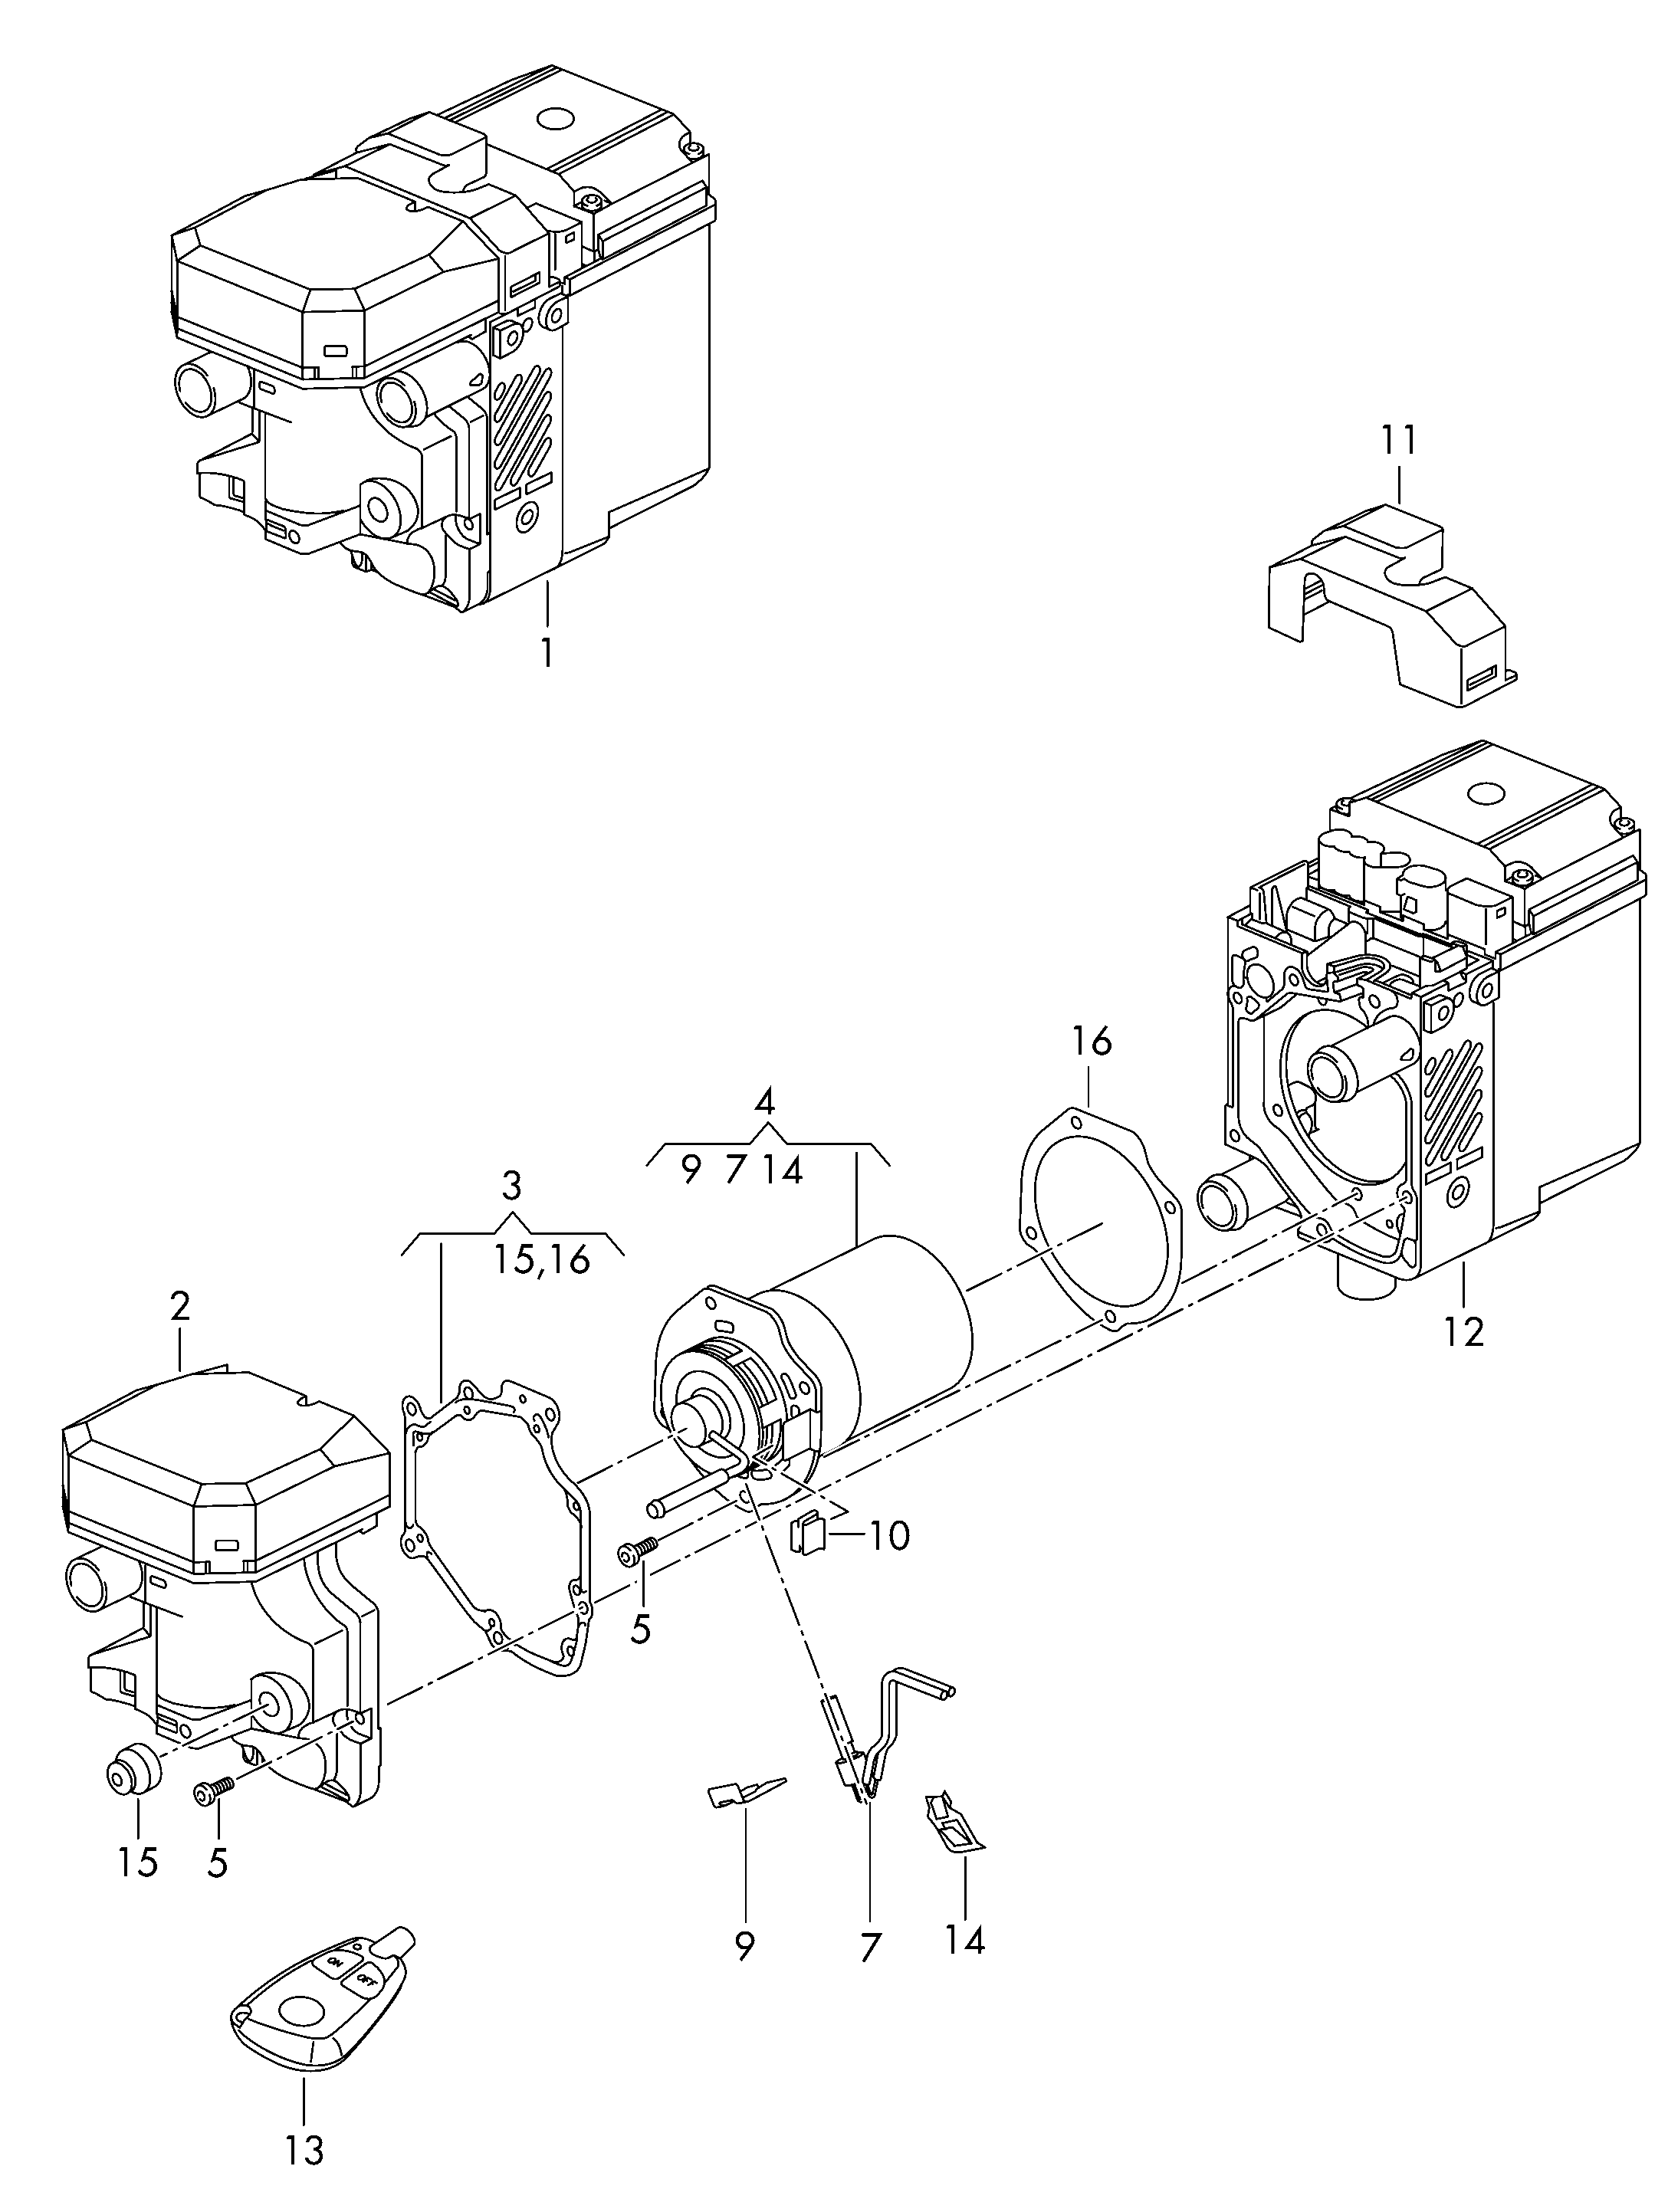 Auxiliary heater for water<br>circuit  - Amarok - ama